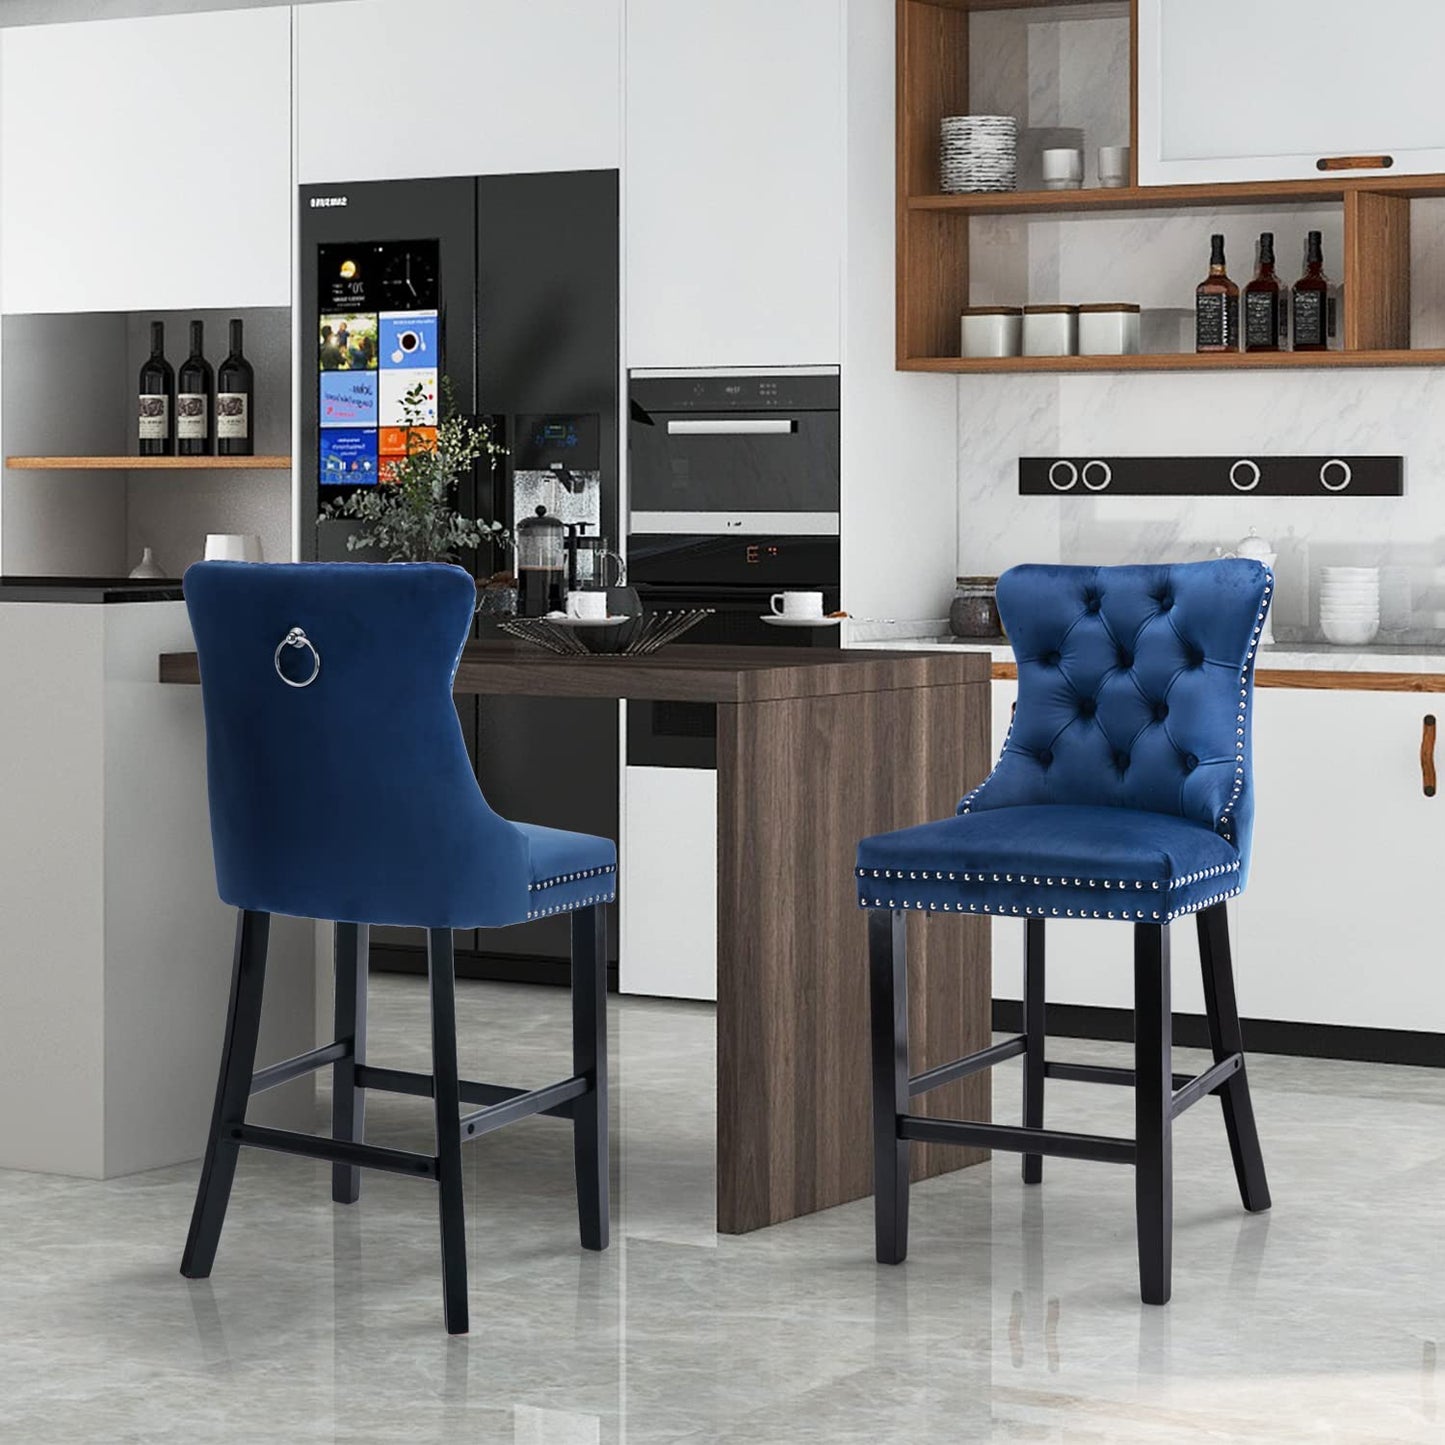 2X Velvet Bar Stools with Studs Trim Wooden Legs Tufted Dining Chairs Kitchen - image19